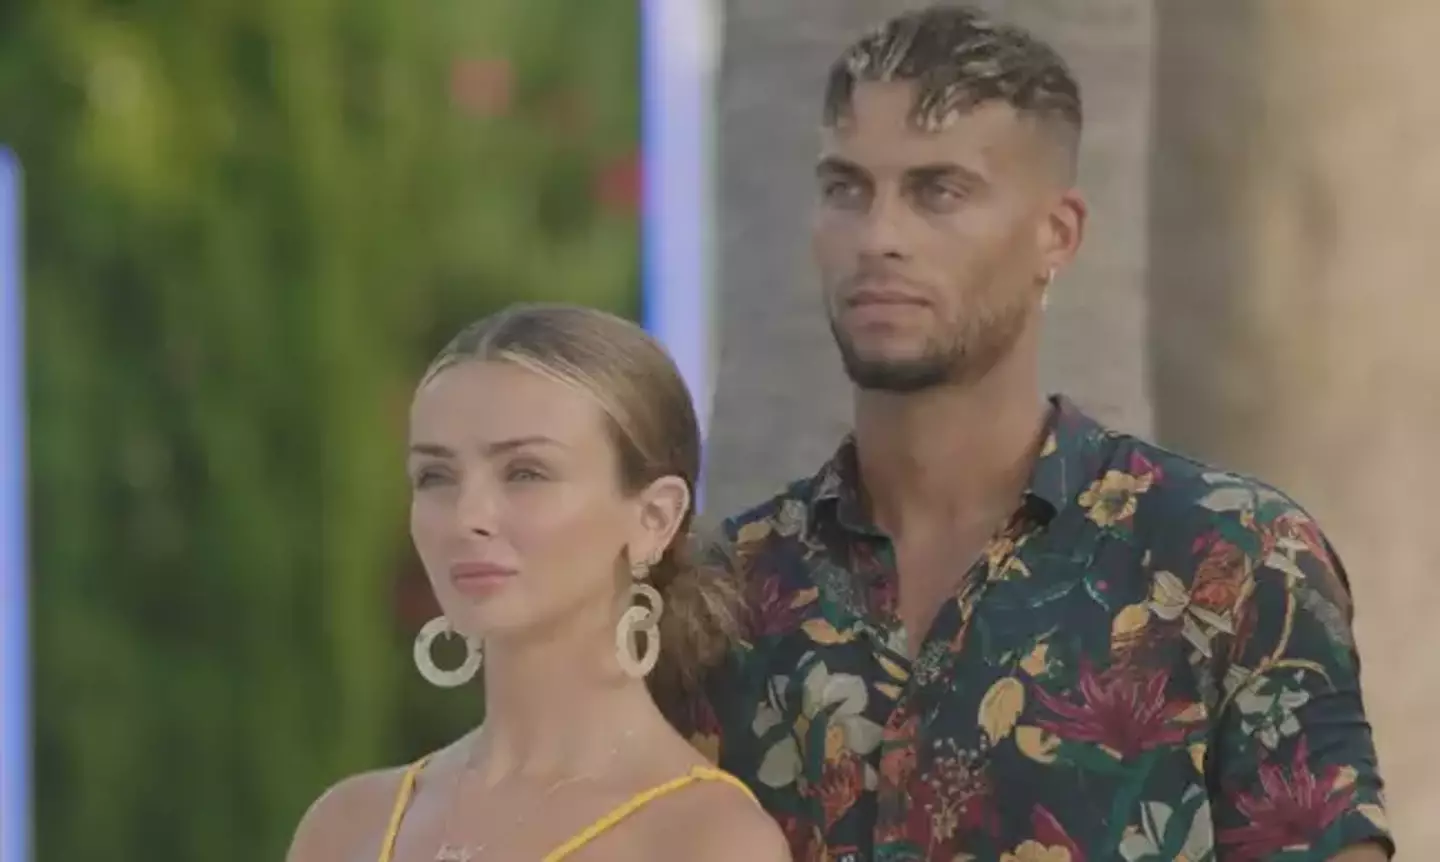 The Love Island couple split up a few weeks after leaving the villa together.